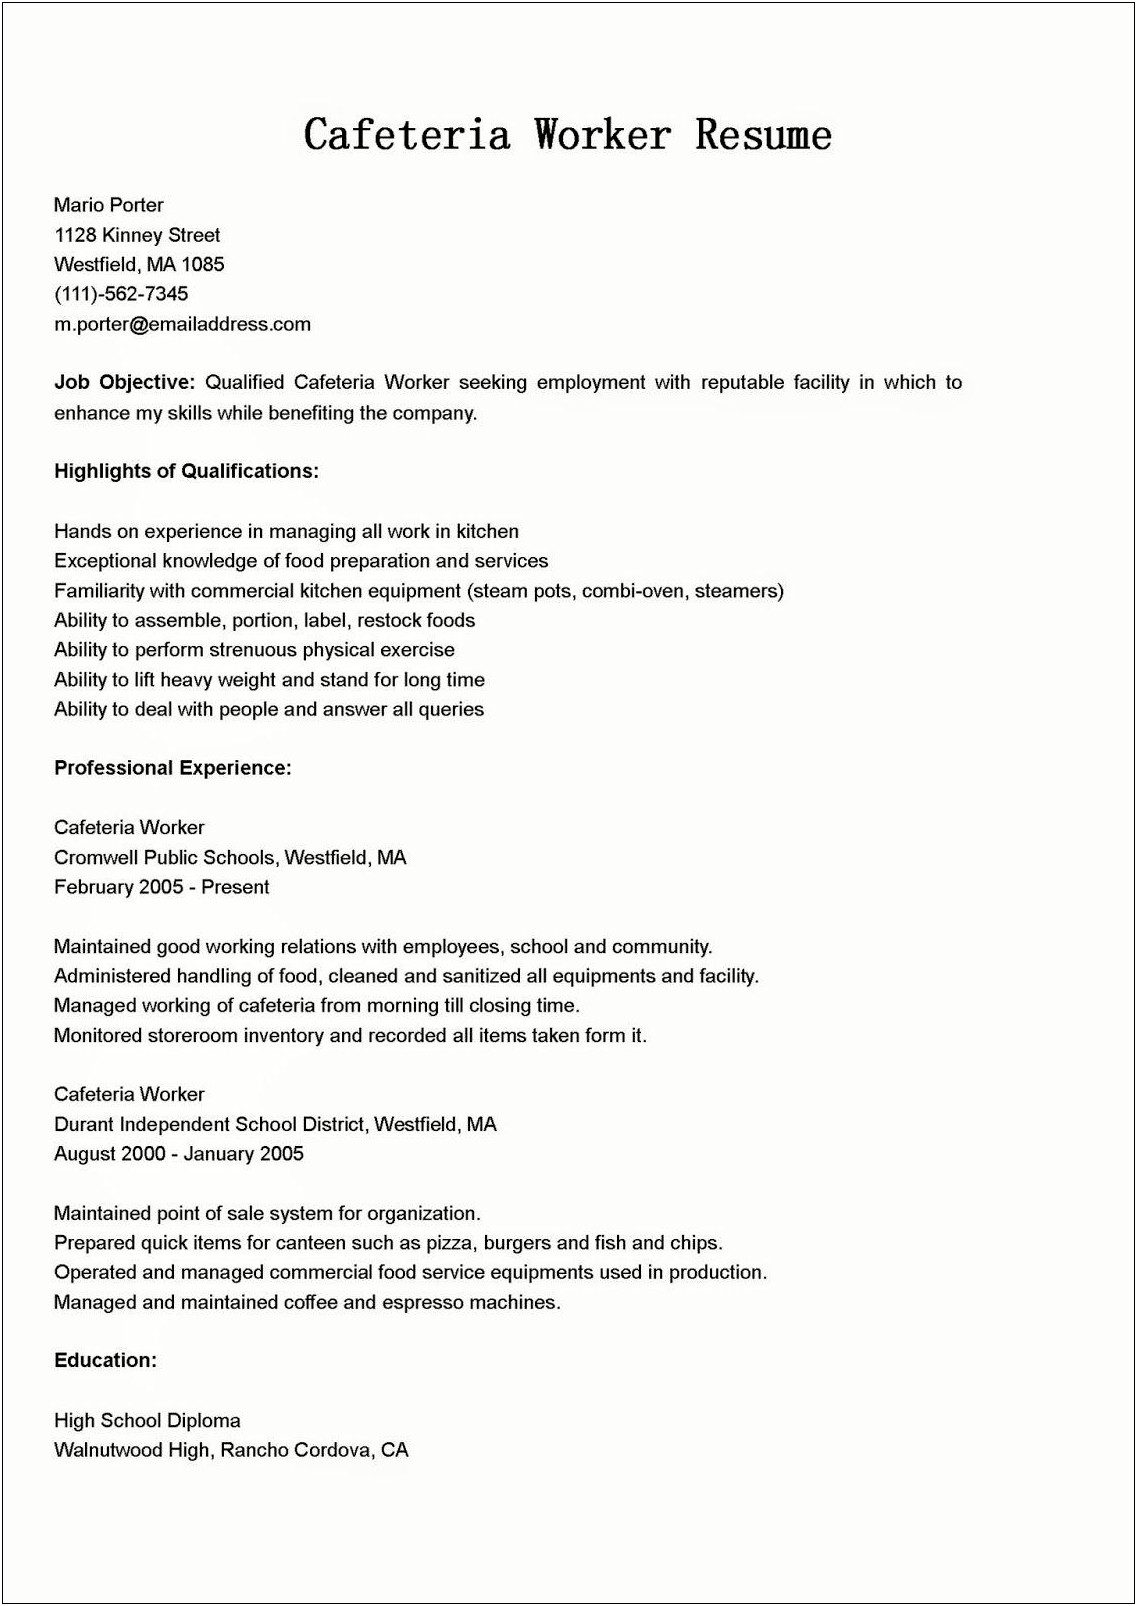 Resume For School Cafeteria Manager